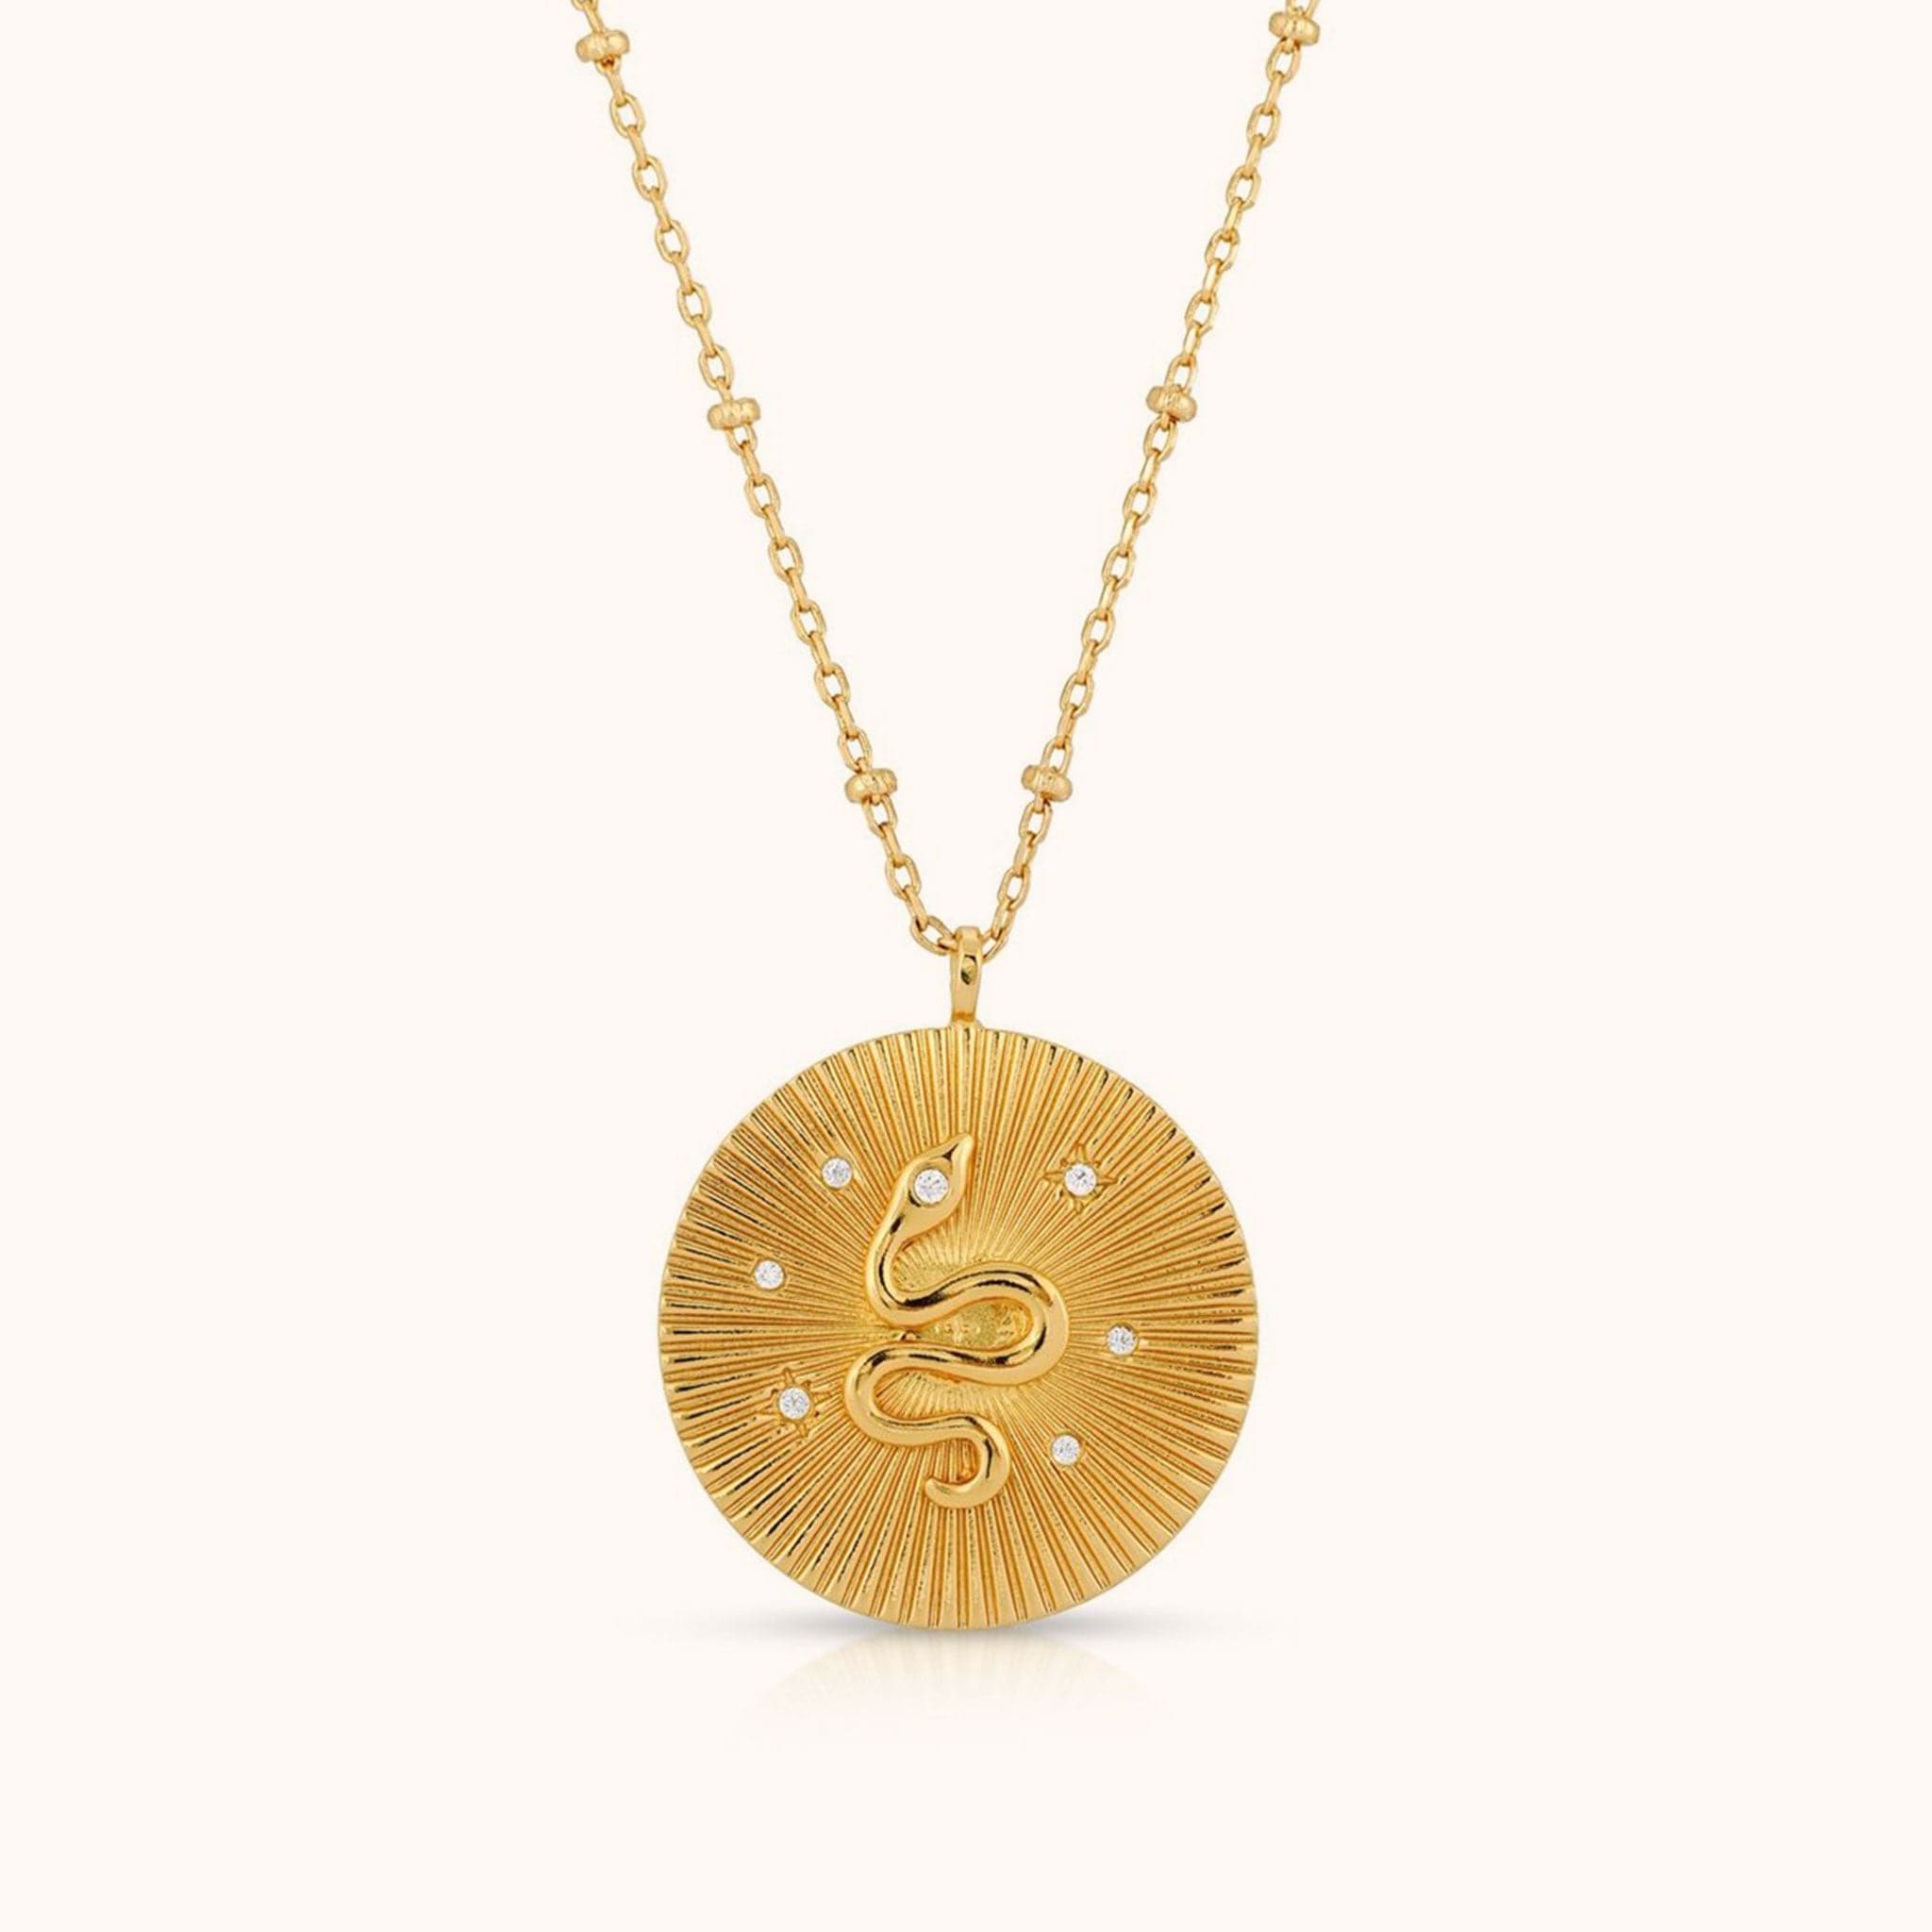 On a white background is a gold necklace with a round pendant in the center that has a snake detail with CZ stones placed around it. 